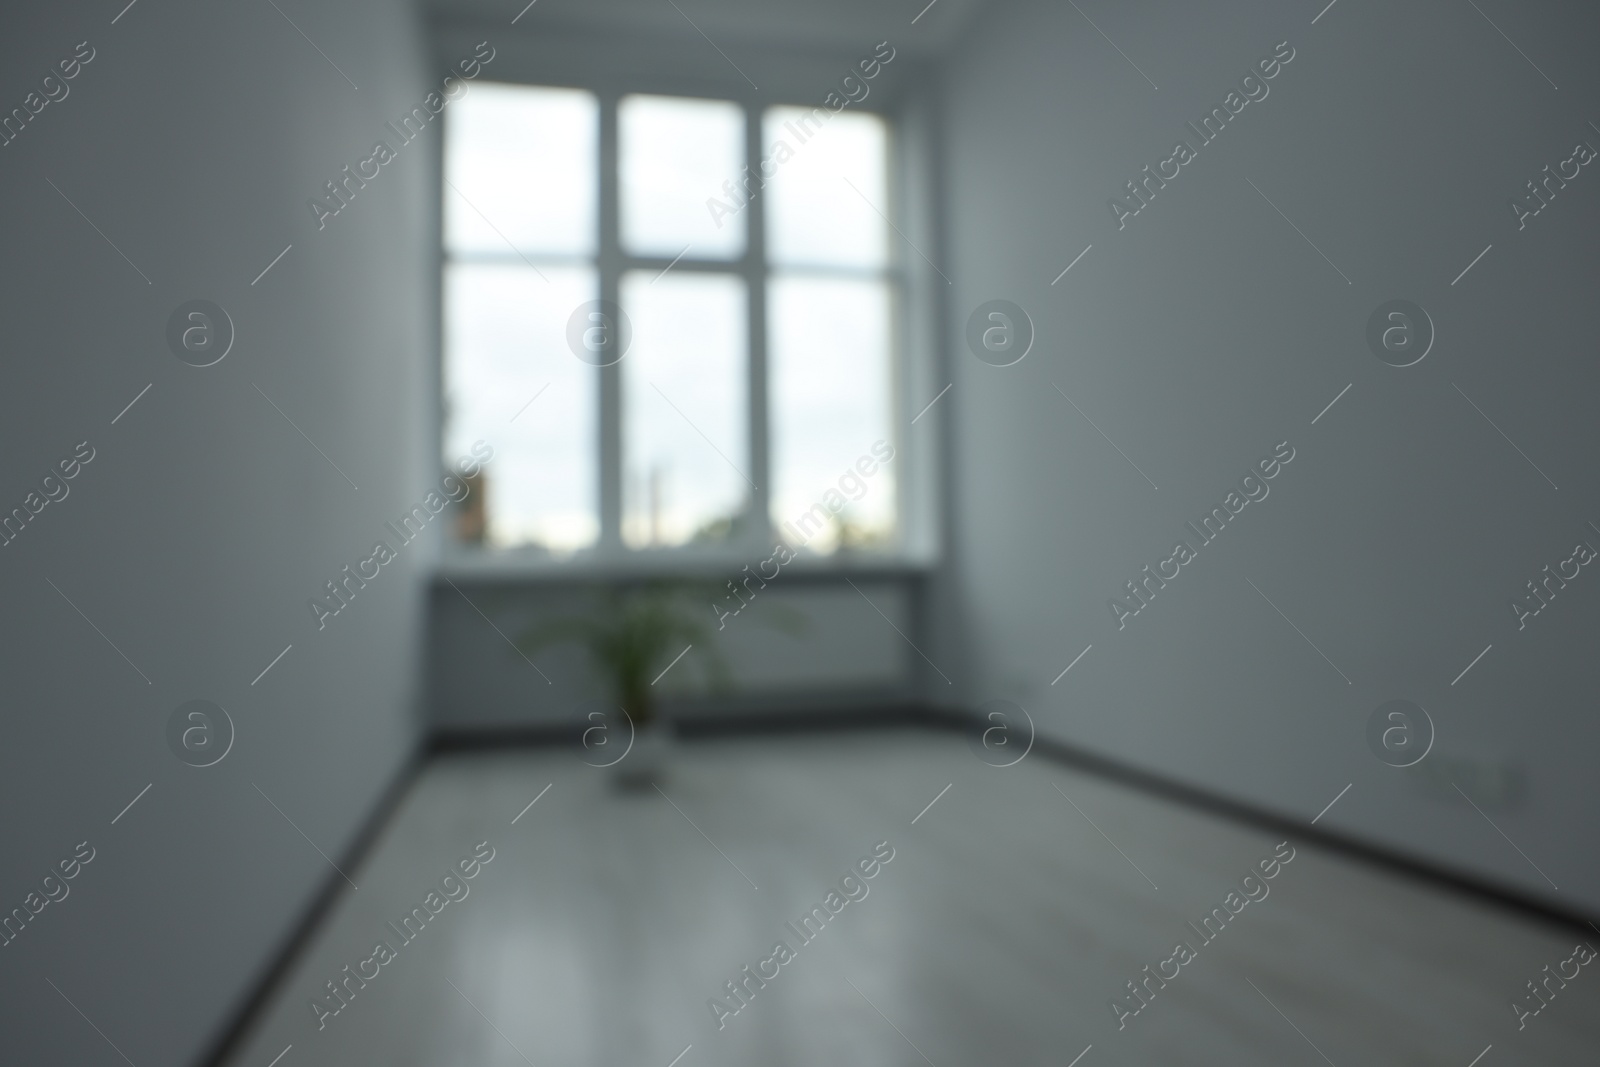 Photo of Blurred view of empty office room with windows and potted houseplants